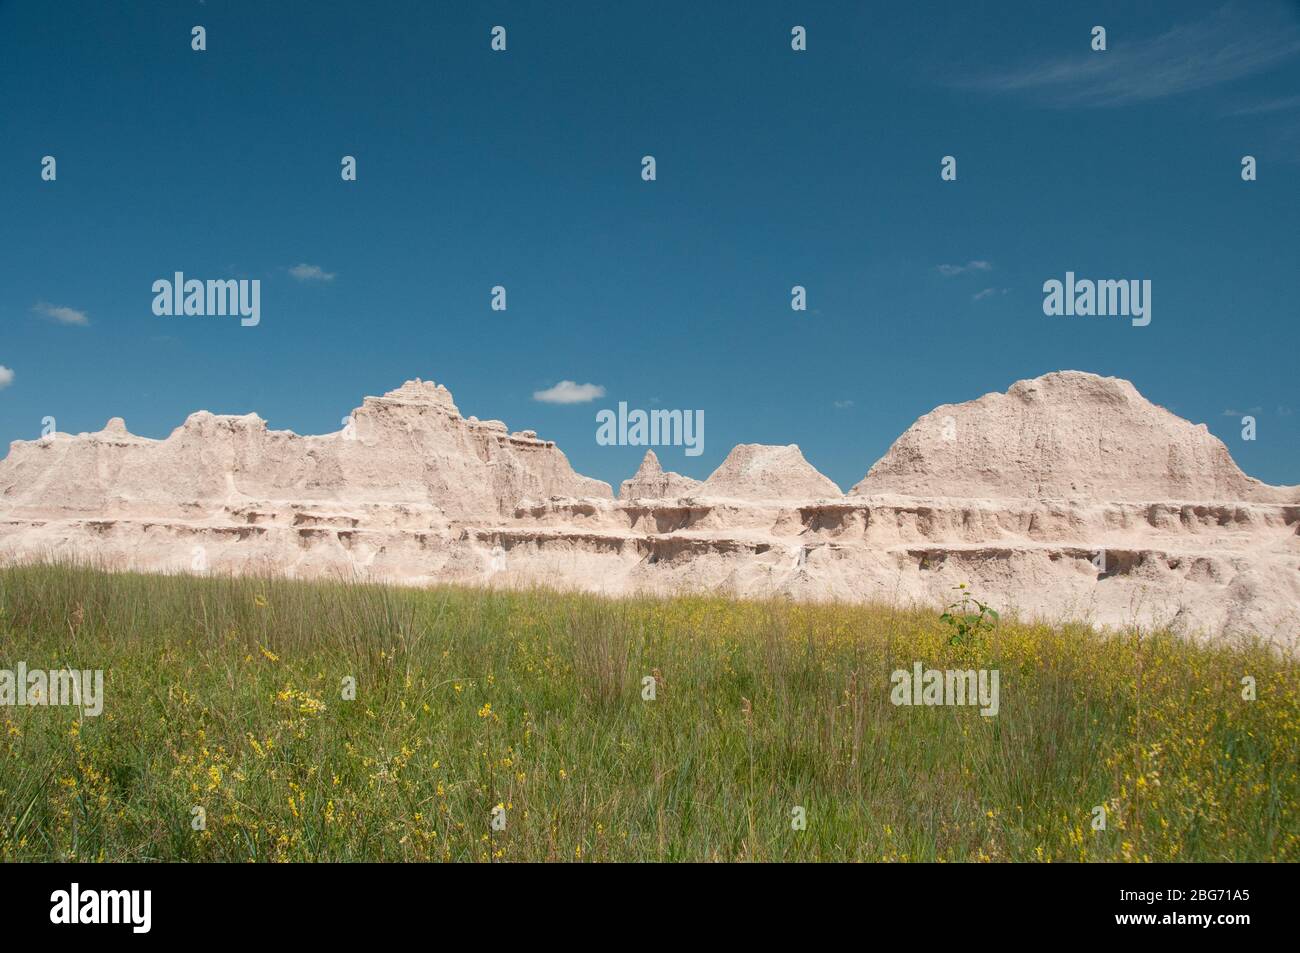 Colorful rock formations in Badlands National Park, South Dakota, USA Stock Photo